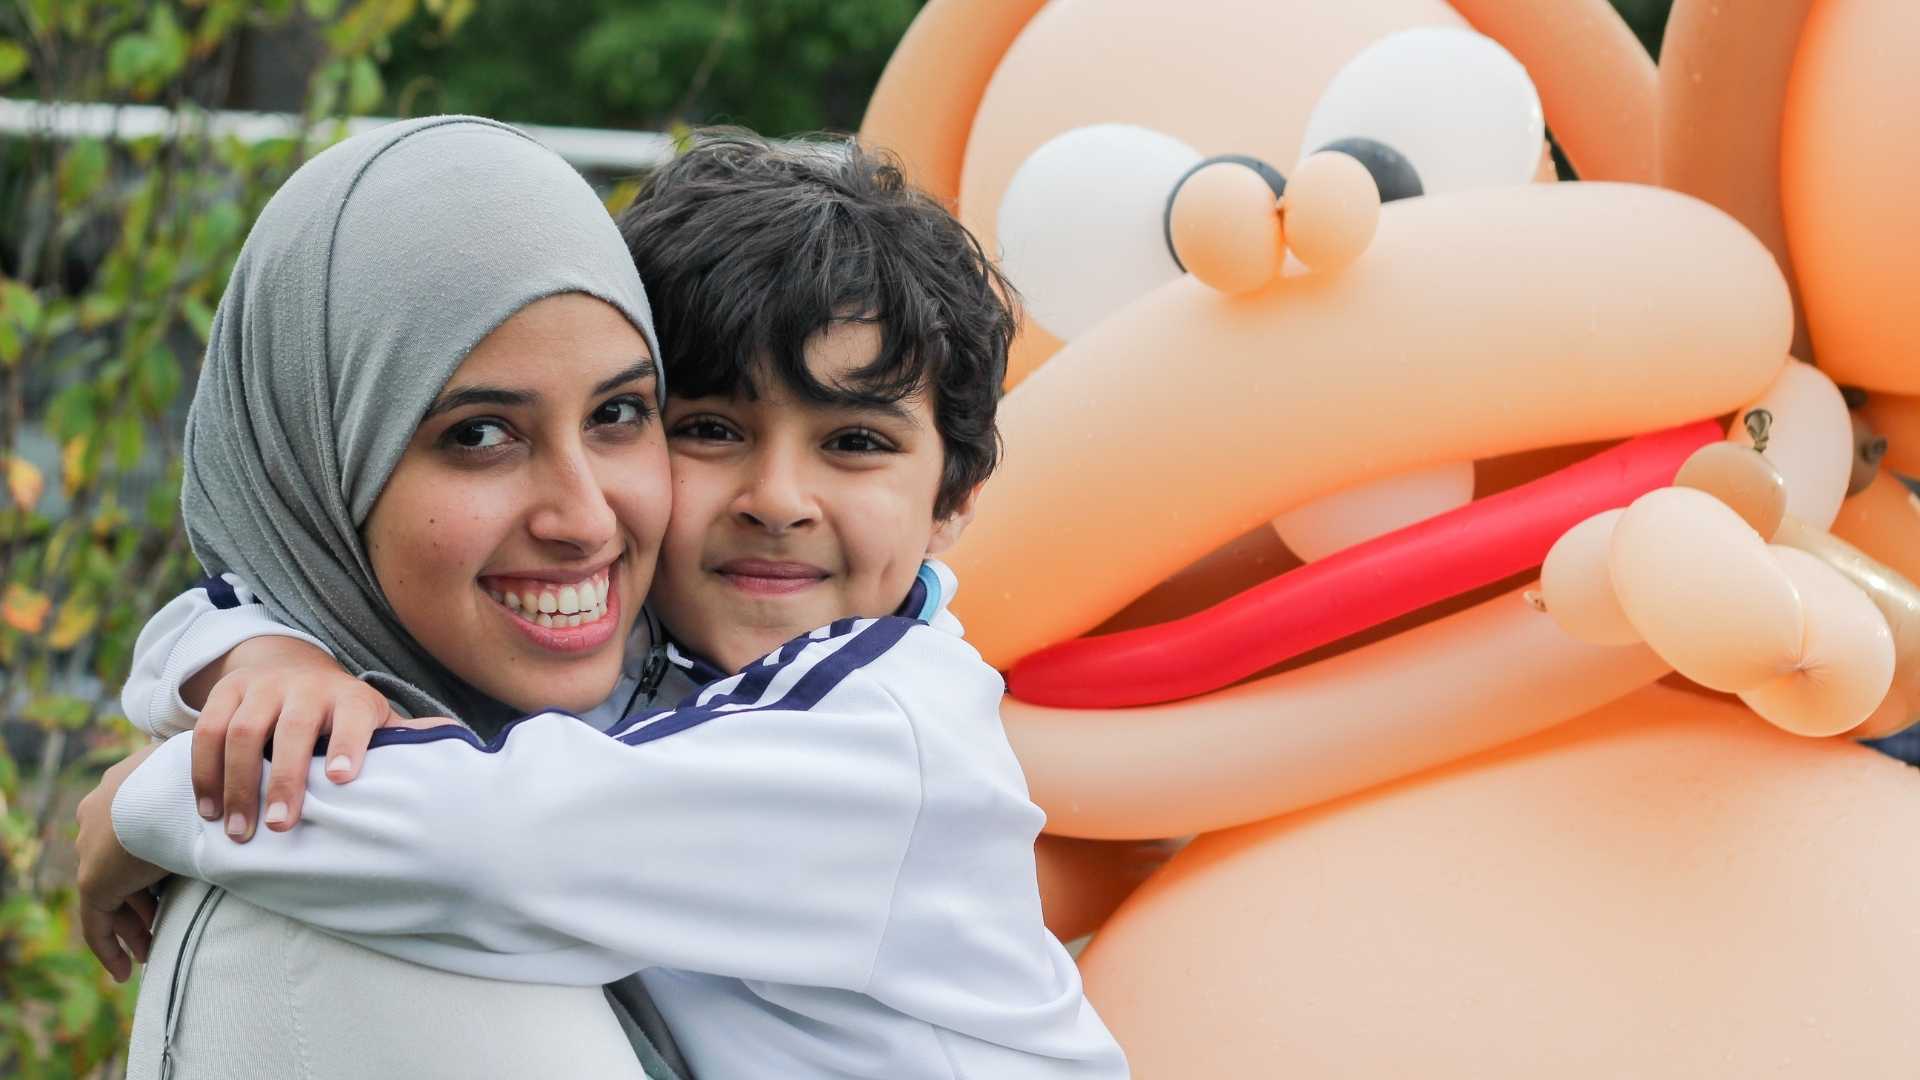 A woman and a boy hugging each other at the park with the PEYO mascot